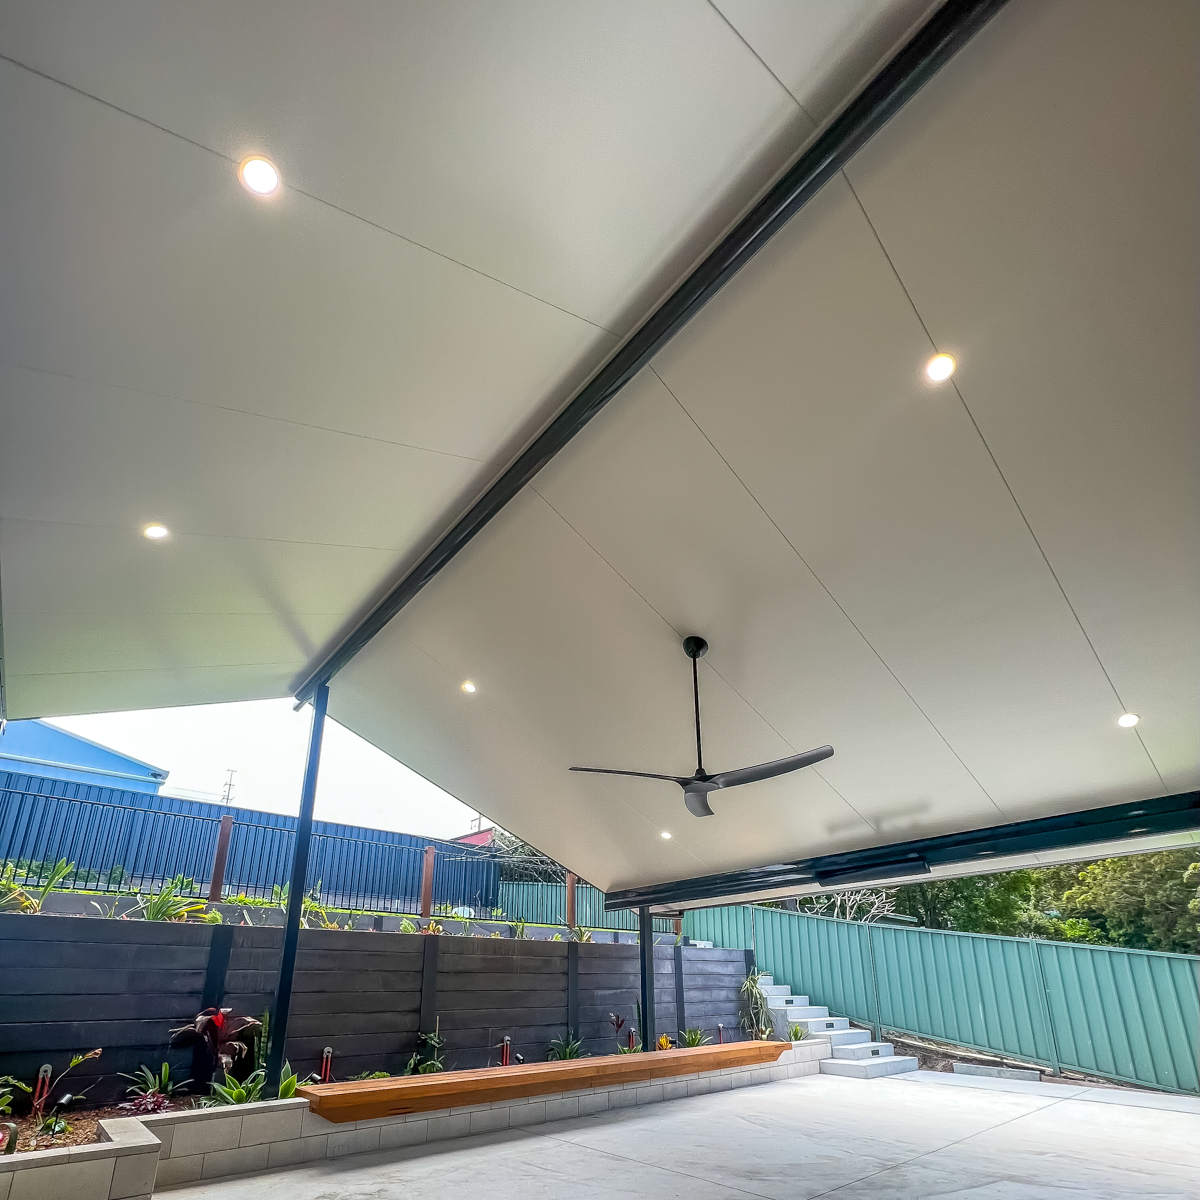 Cooldek skillion outdoor covering at rear of home